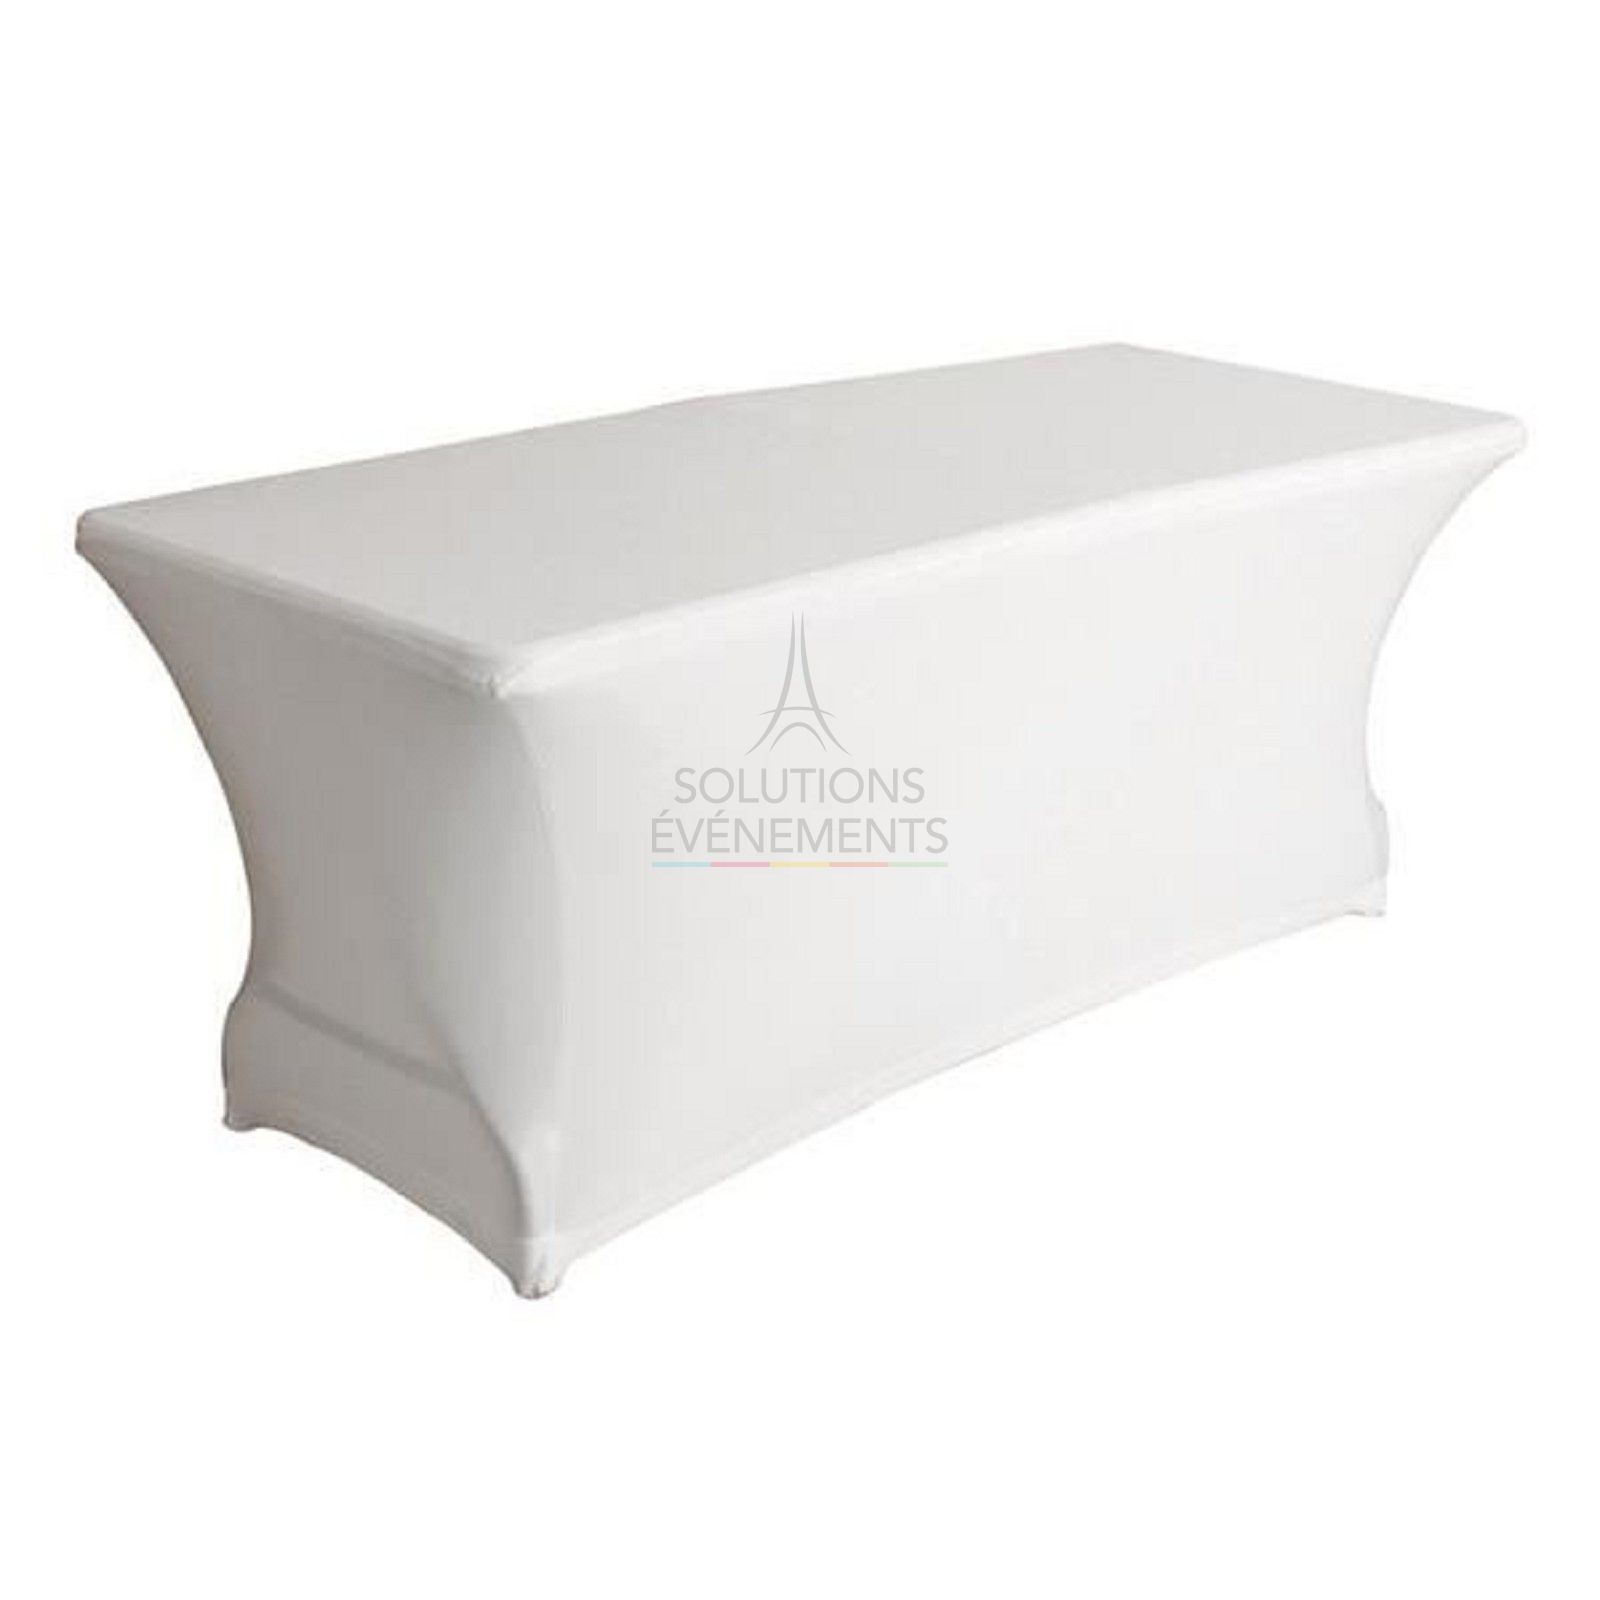 Rental of stretchy lycra or spandex type covers for table coverings